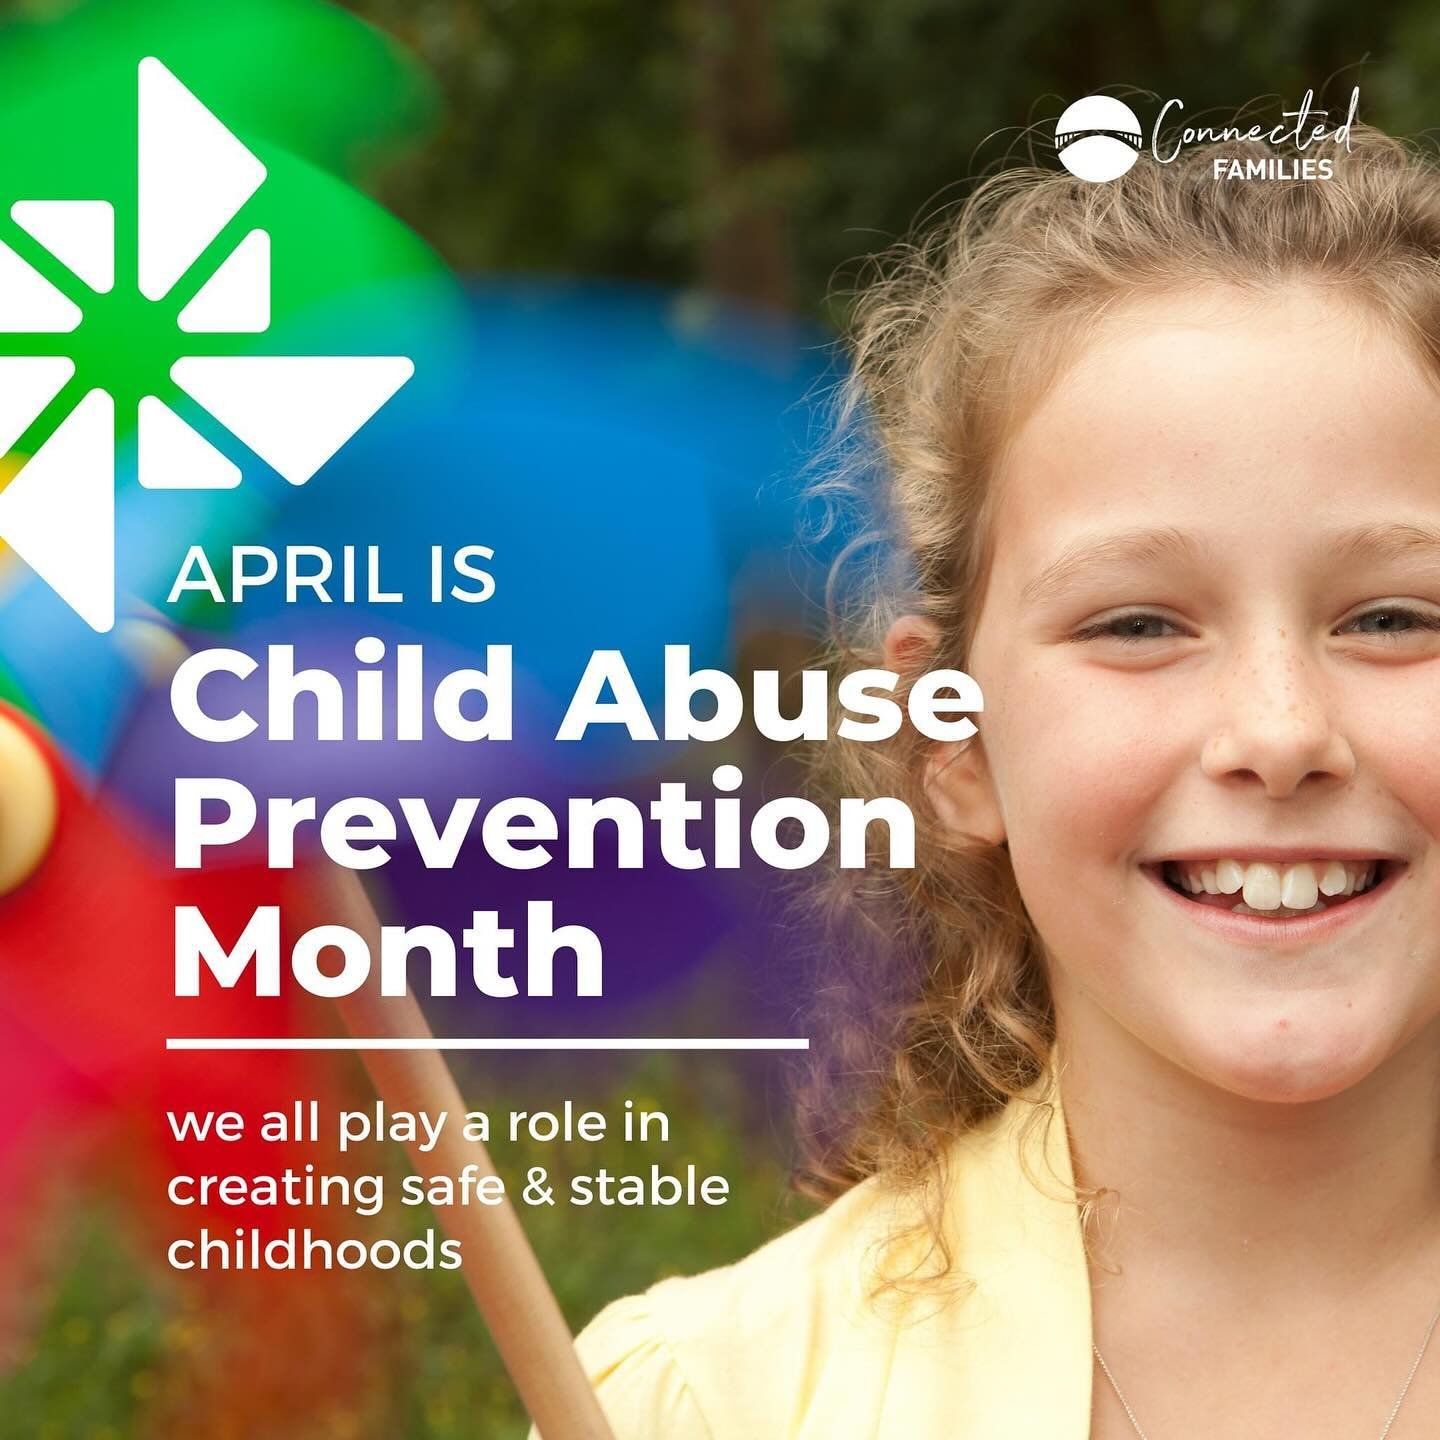 April marks Child Abuse Prevention Month, a time to recognize our collective role in nurturing healthy childhoods. Communities equipping families with resources, skills, and strong support systems is pivotal in reducing the risk of child abuse. One o